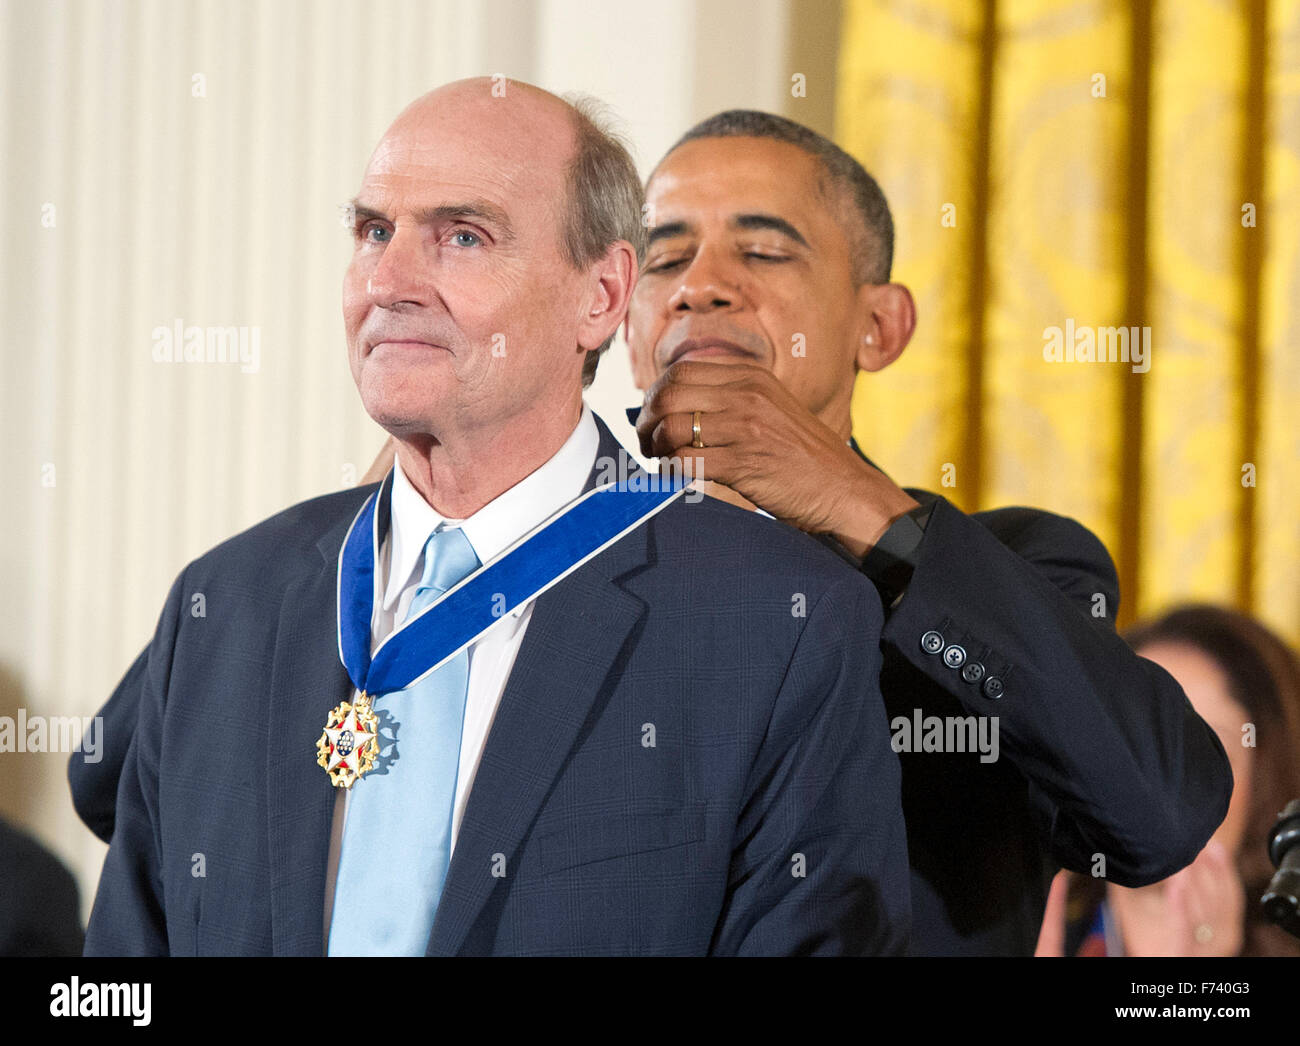 Recording artist James Taylor receives the Presidential Medal of Freedom from United States President Barack Obama during a ceremony in the East Room of the White House in Washington, DC on Tuesday, November 24, 2015. The Medal is the highest US civilian honor, presented to individuals who have made especially meritorious contributions to the security or national interests of the US, to world peace, or to cultural or significant public or private endeavors. Photo: Ron Sachs/CNP/dpa - NO WIRE SERVICE - Stock Photo